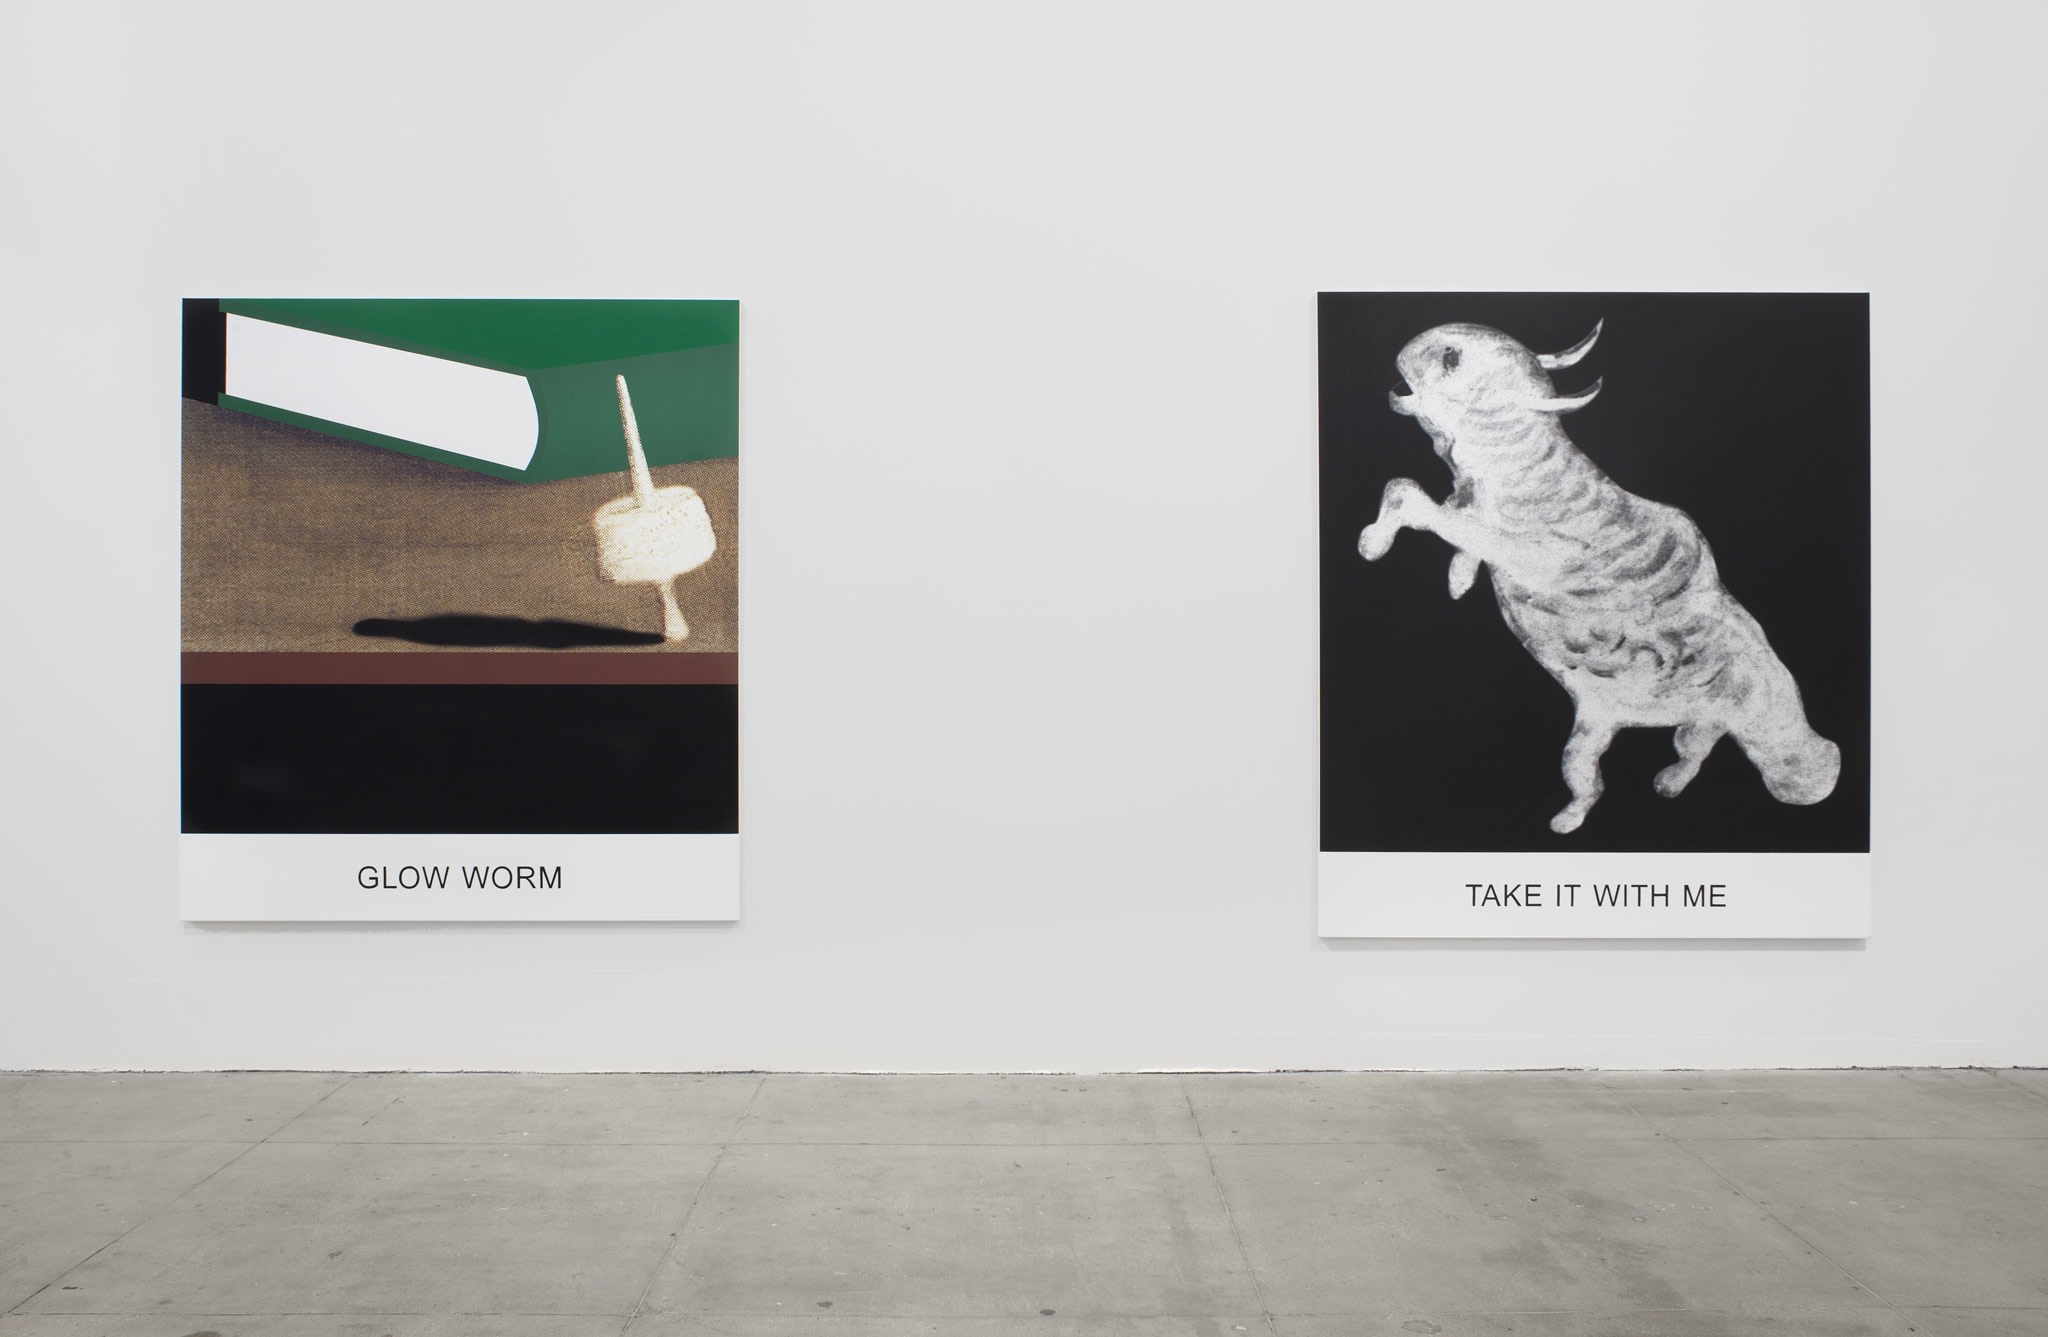 Two prints on canvas: 1-a green book behind an impaled marshmallow, 2-a white hybrid animal